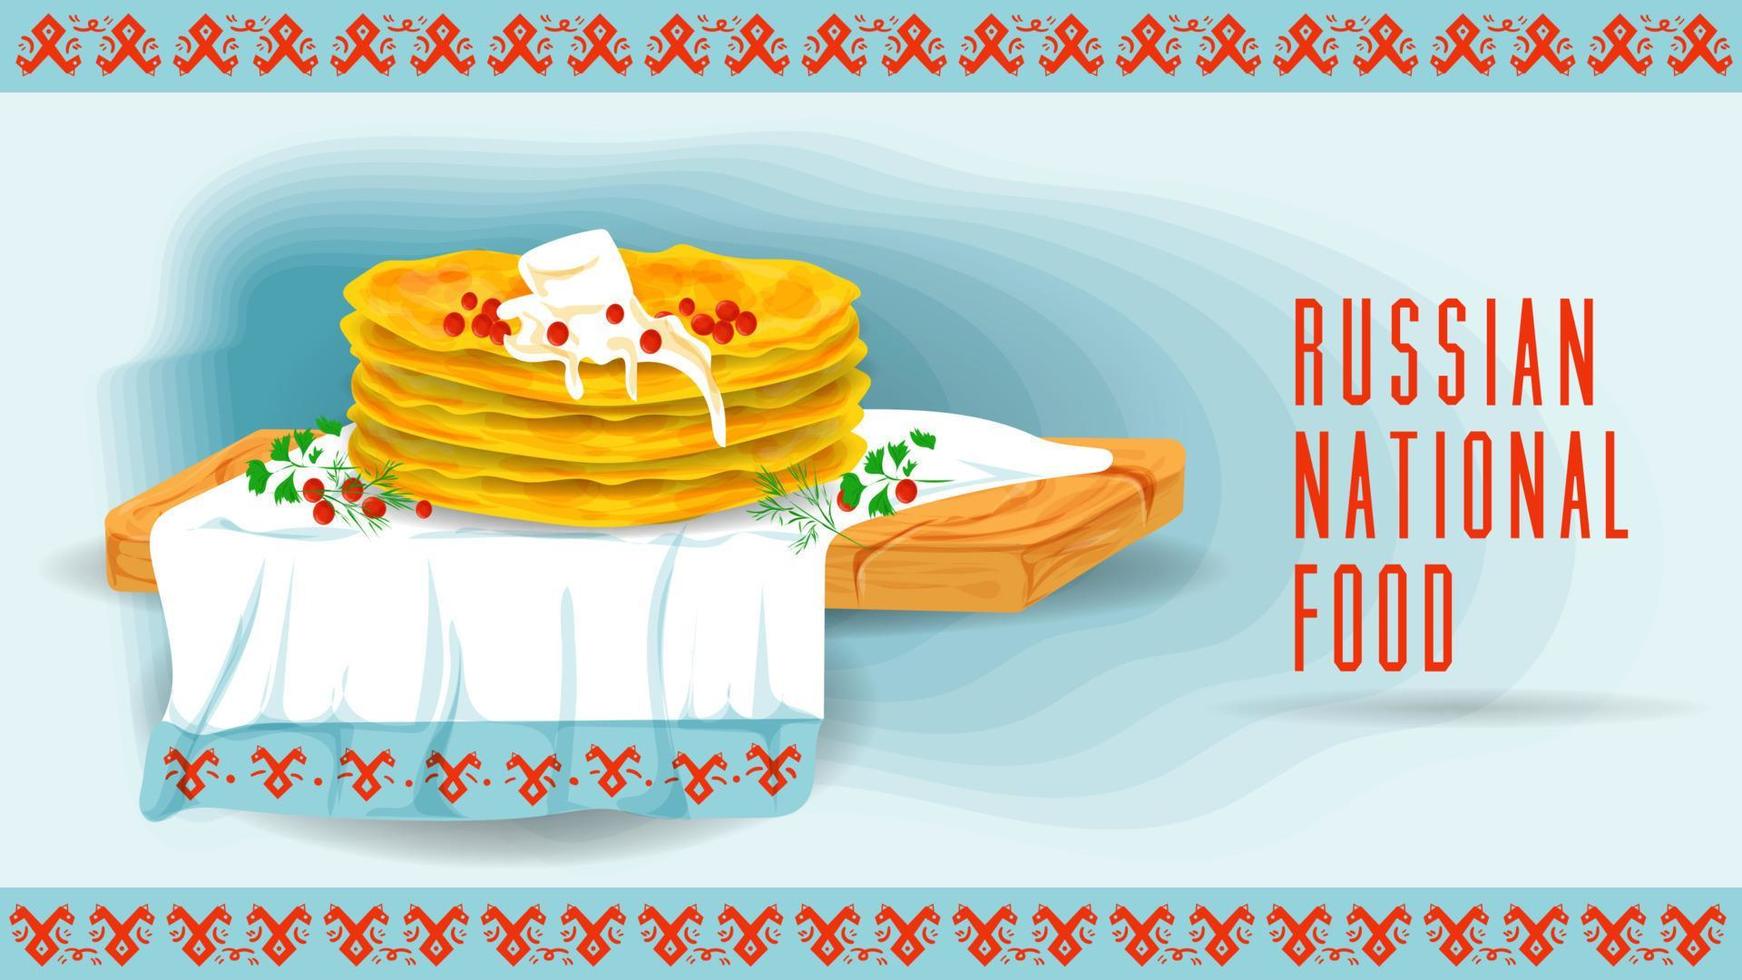 fried pancakes with red fish caviar on a towel with an ornament is a flat illustration of traditional food vector